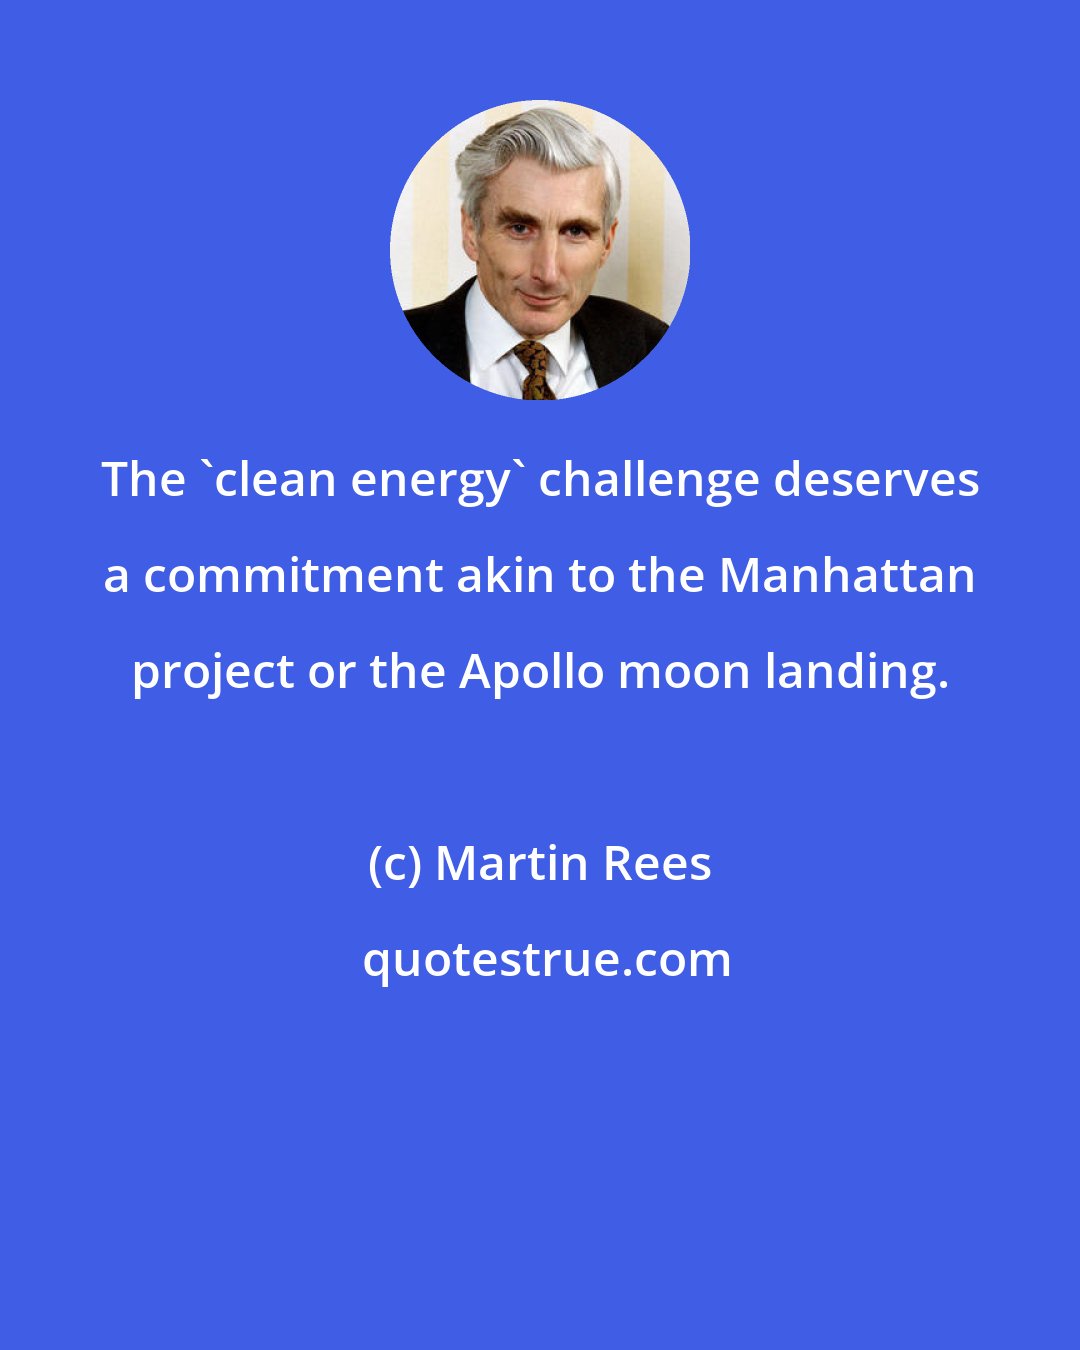 Martin Rees: The 'clean energy' challenge deserves a commitment akin to the Manhattan project or the Apollo moon landing.